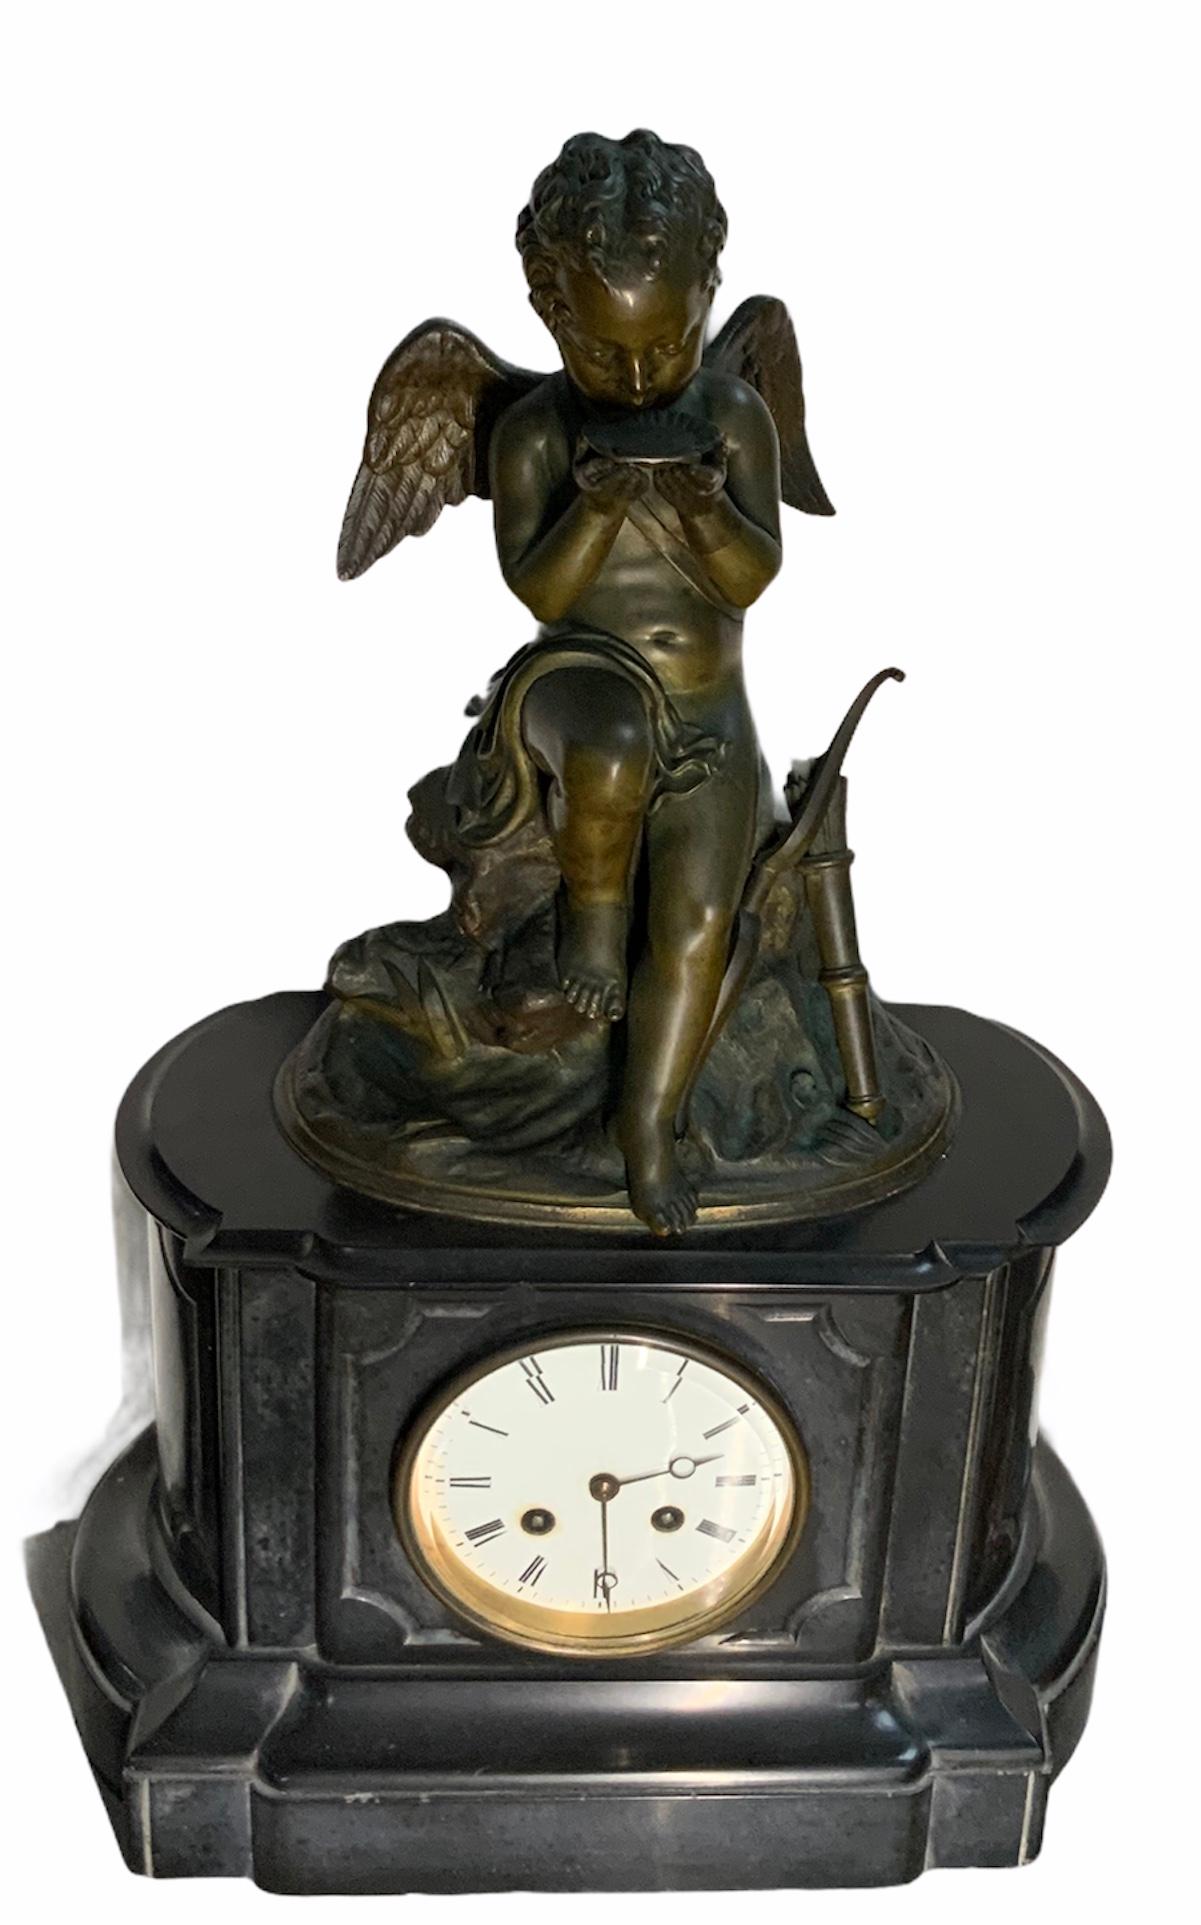 This is a French figural patinated bronze sculpture mantel clock of a winged Cherub hunter by Lemire Charles Gabriel Sauvage. The thirsty Cherub is seated over a large rock with some foliages drinking water from a seashell. He is semi nude and a